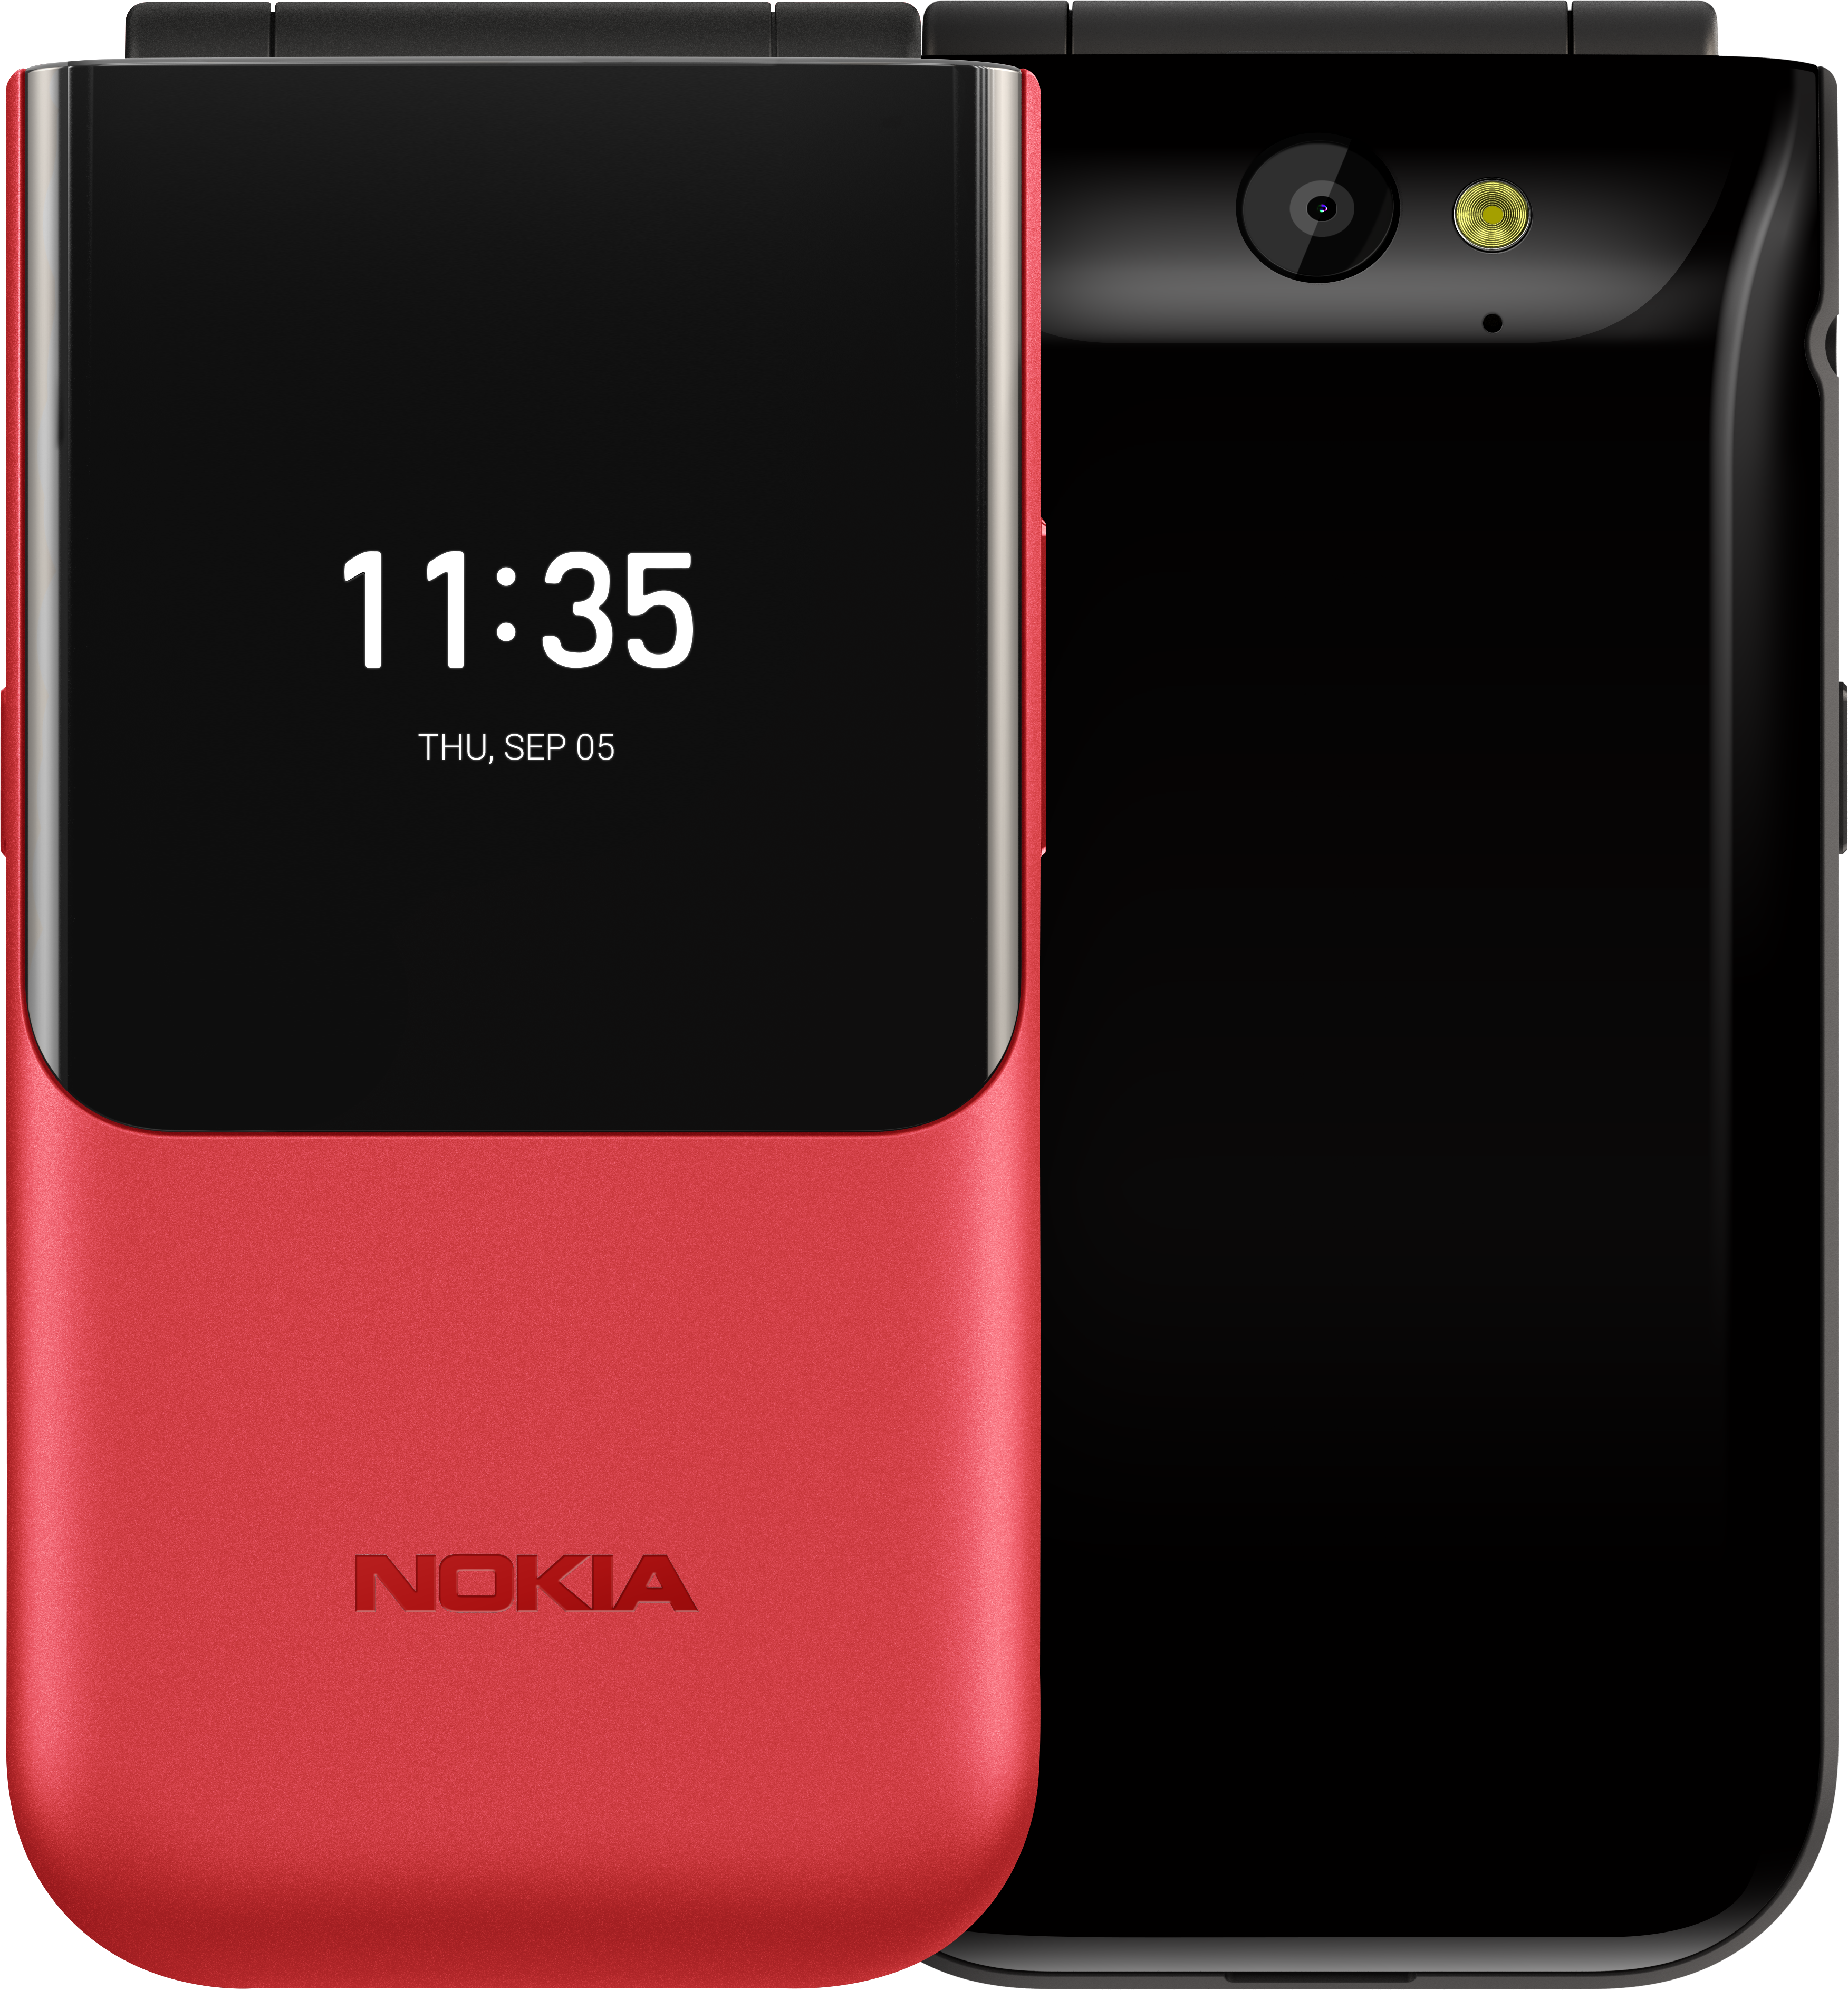 Nokia 2720 Flip full specifications, pros and cons, reviews, videos,  pictures 